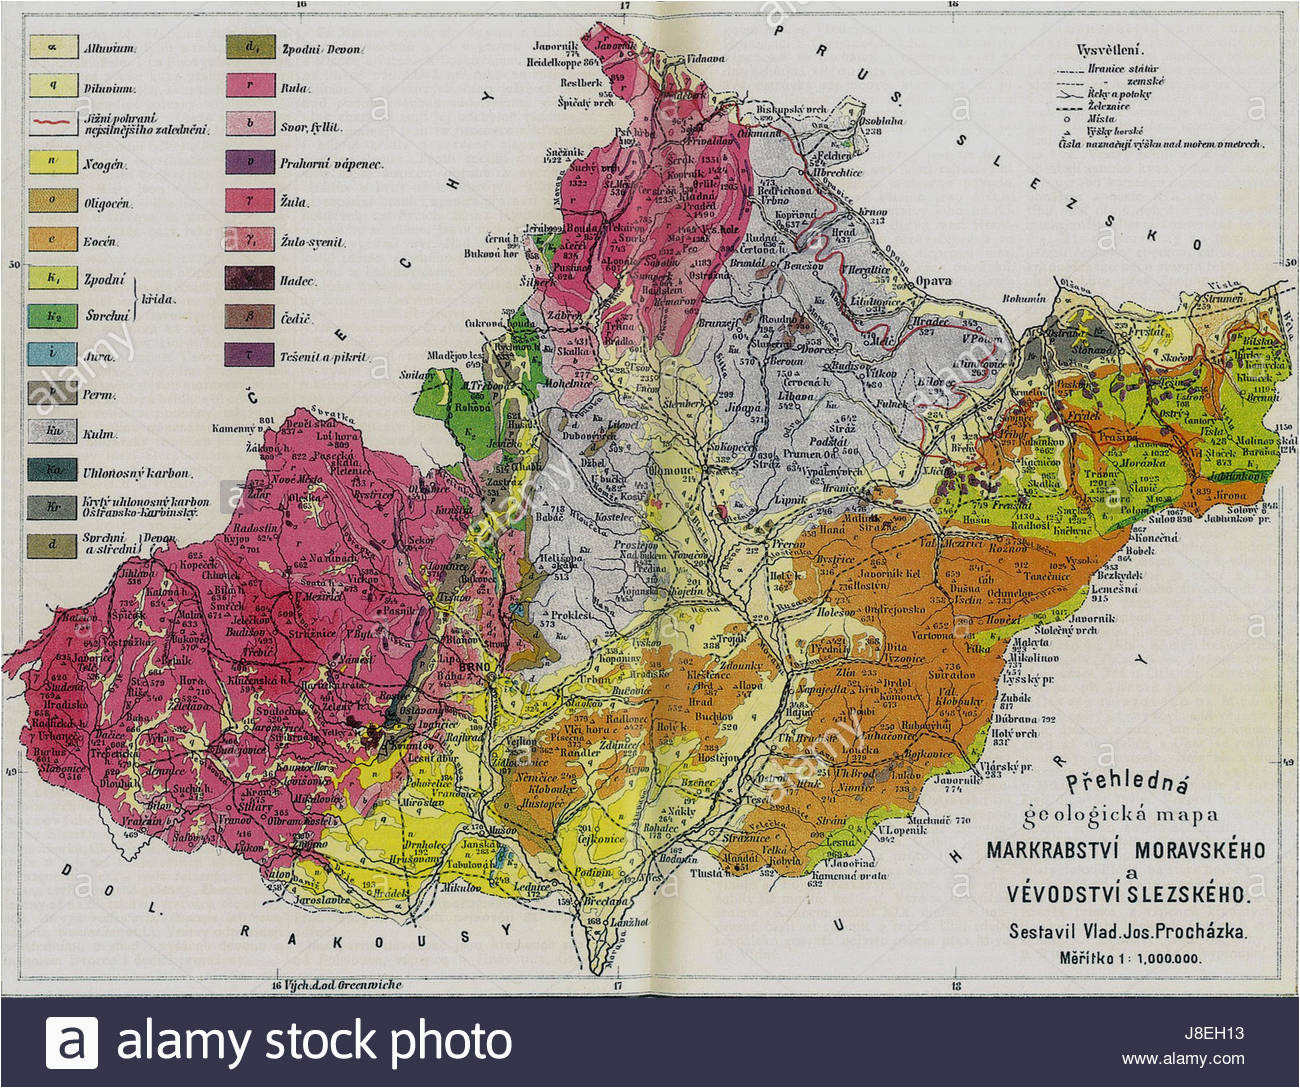 geological map stock photos geological map stock images alamy